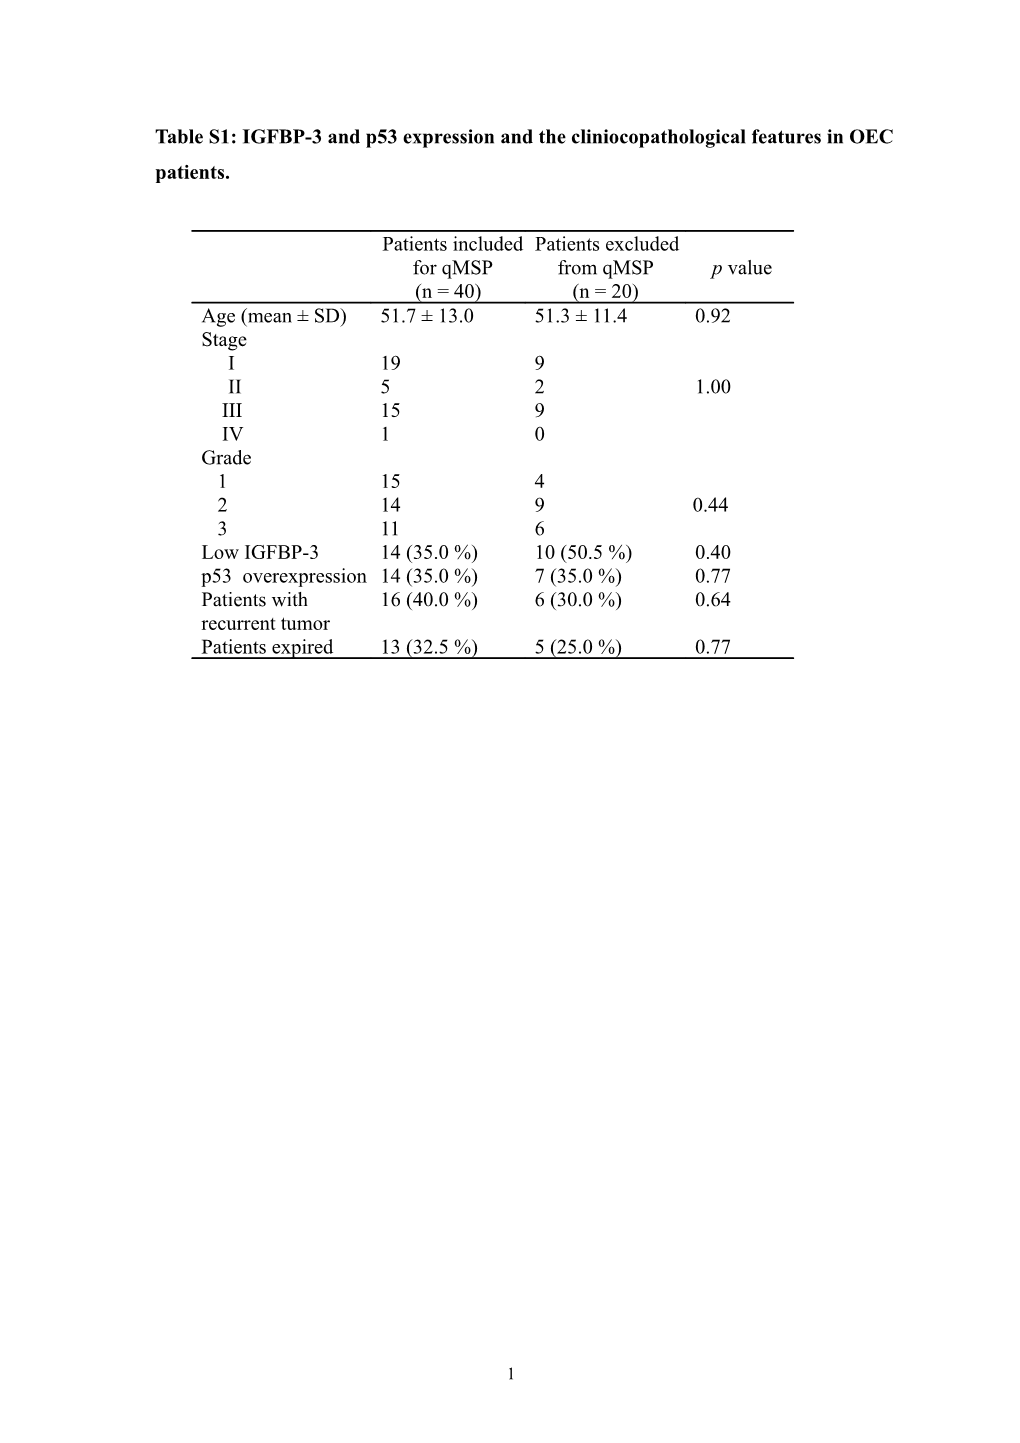 Table S1: IGFBP-3 and P53 Expression and the Cliniocopathological Features in OEC Patients